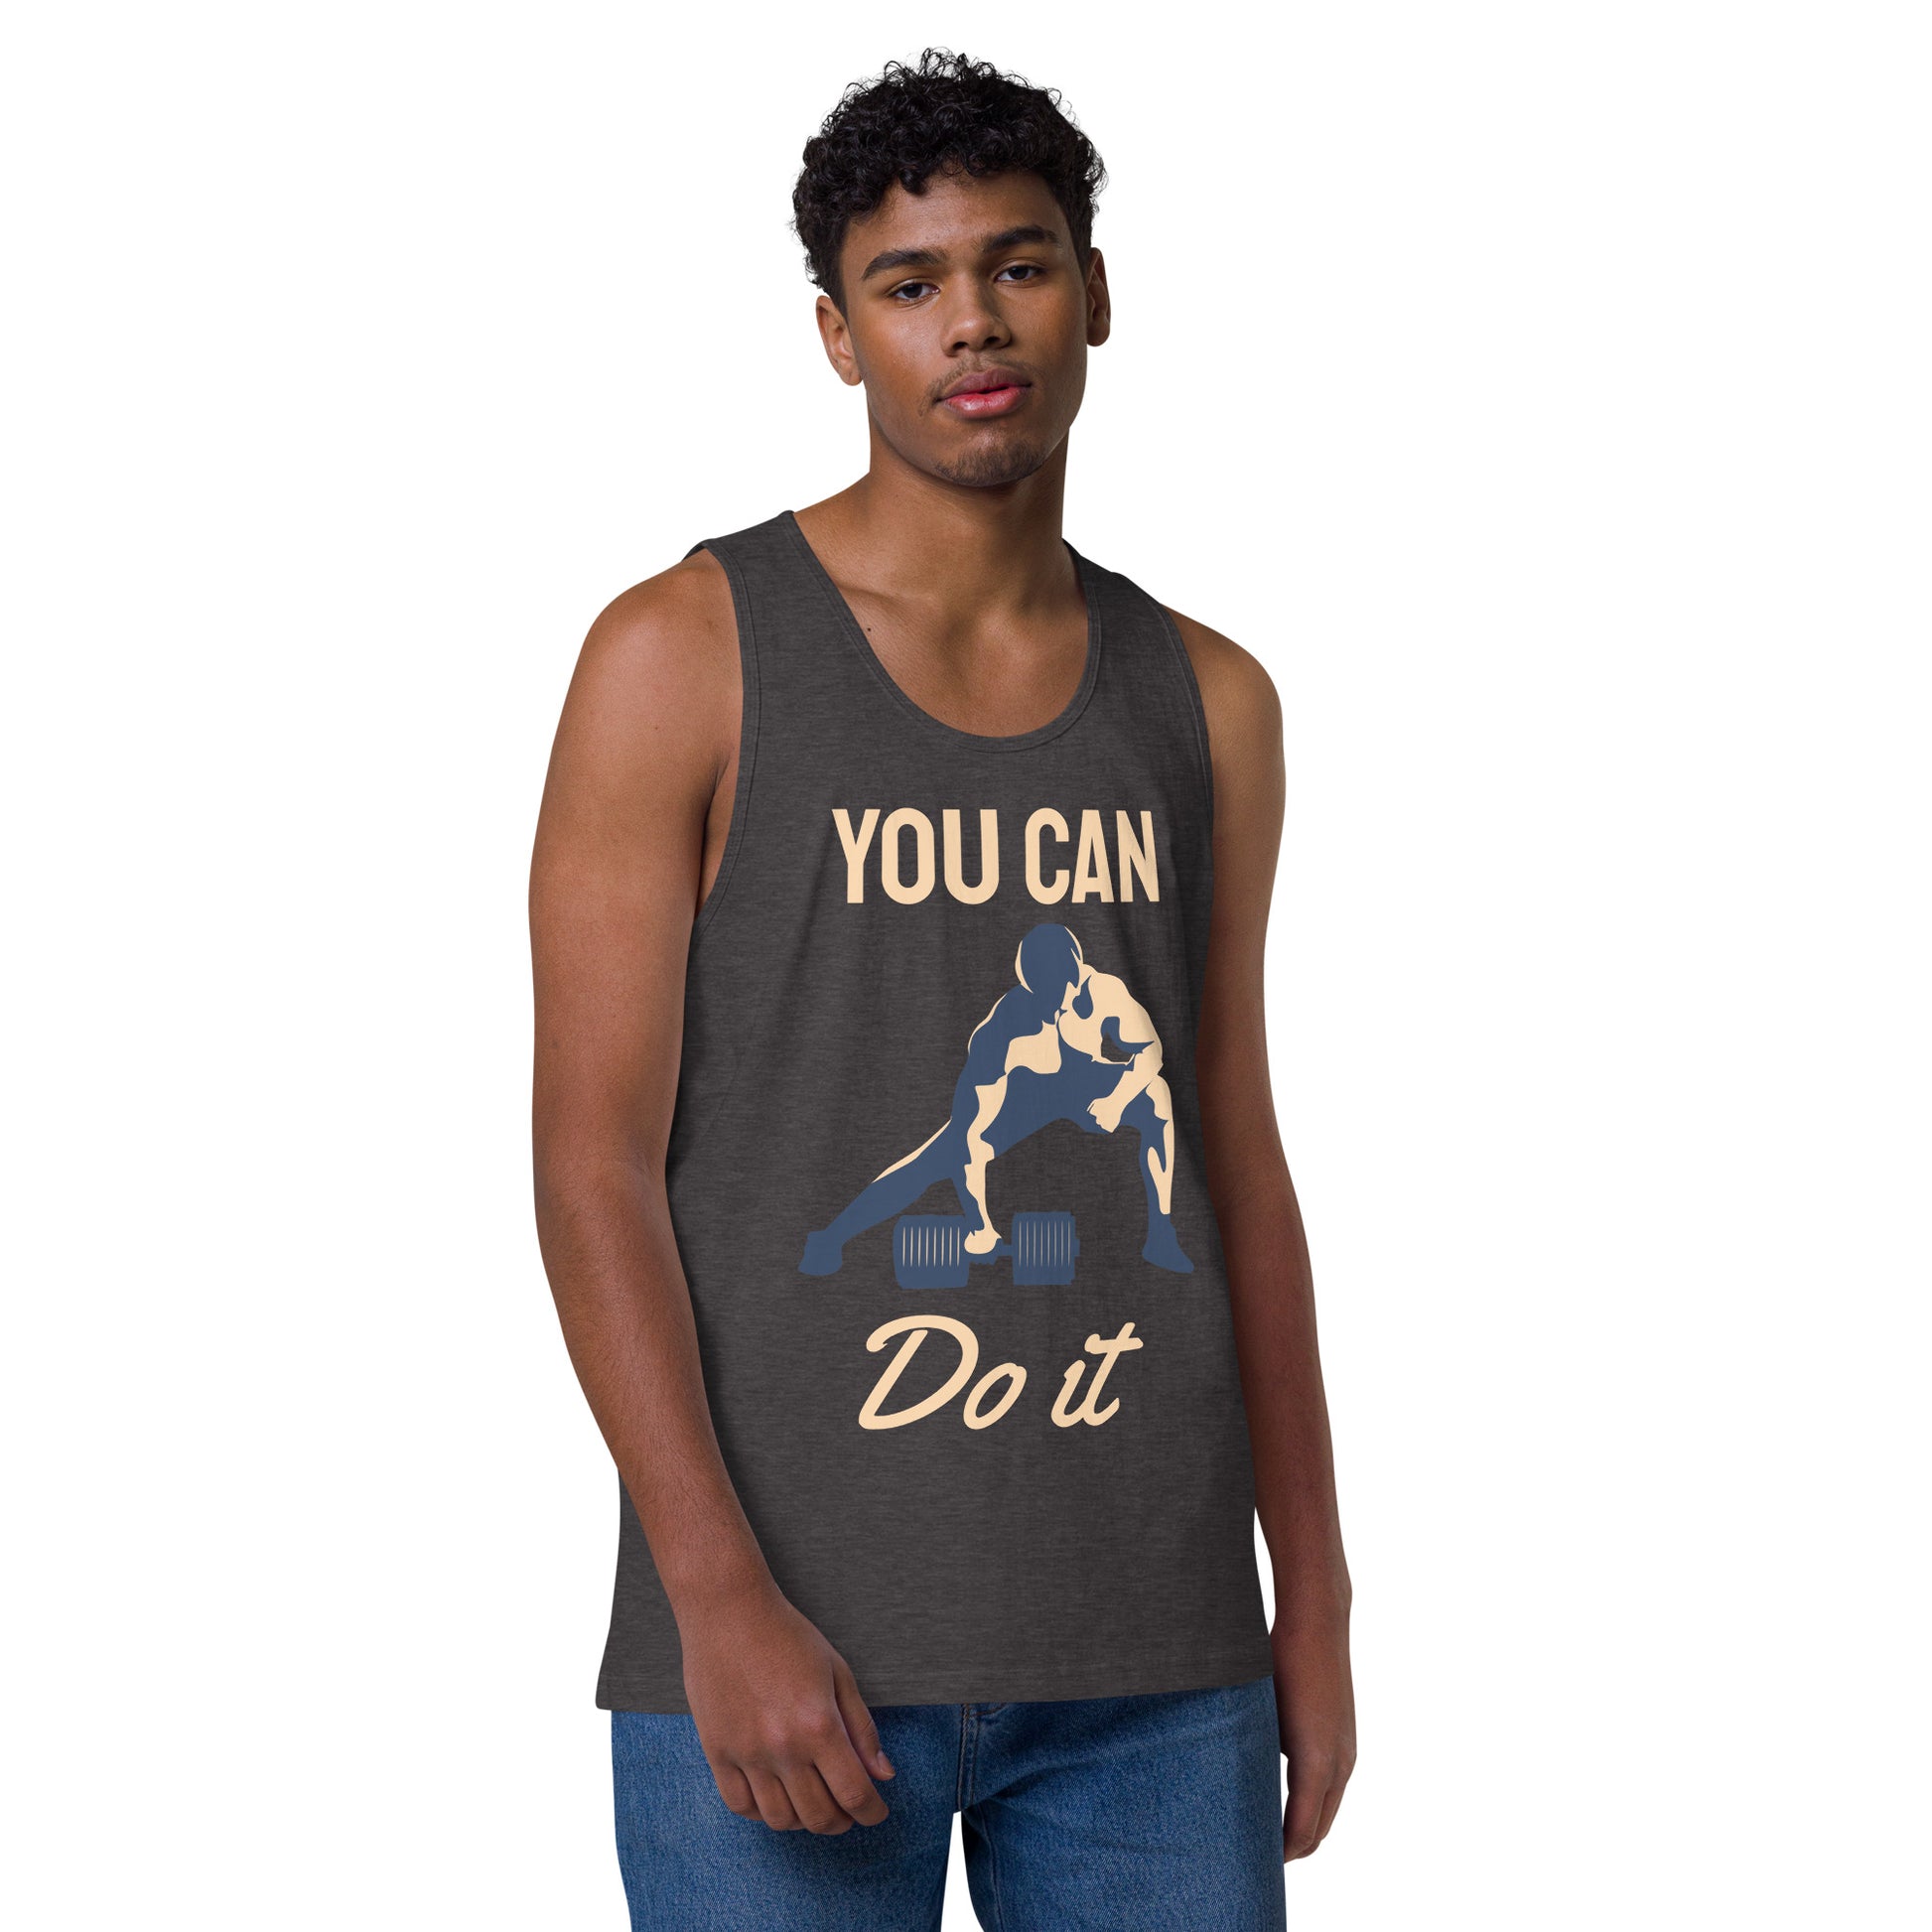 You can do it premium tank top - Charcoal Heather / S - Sport Finesse